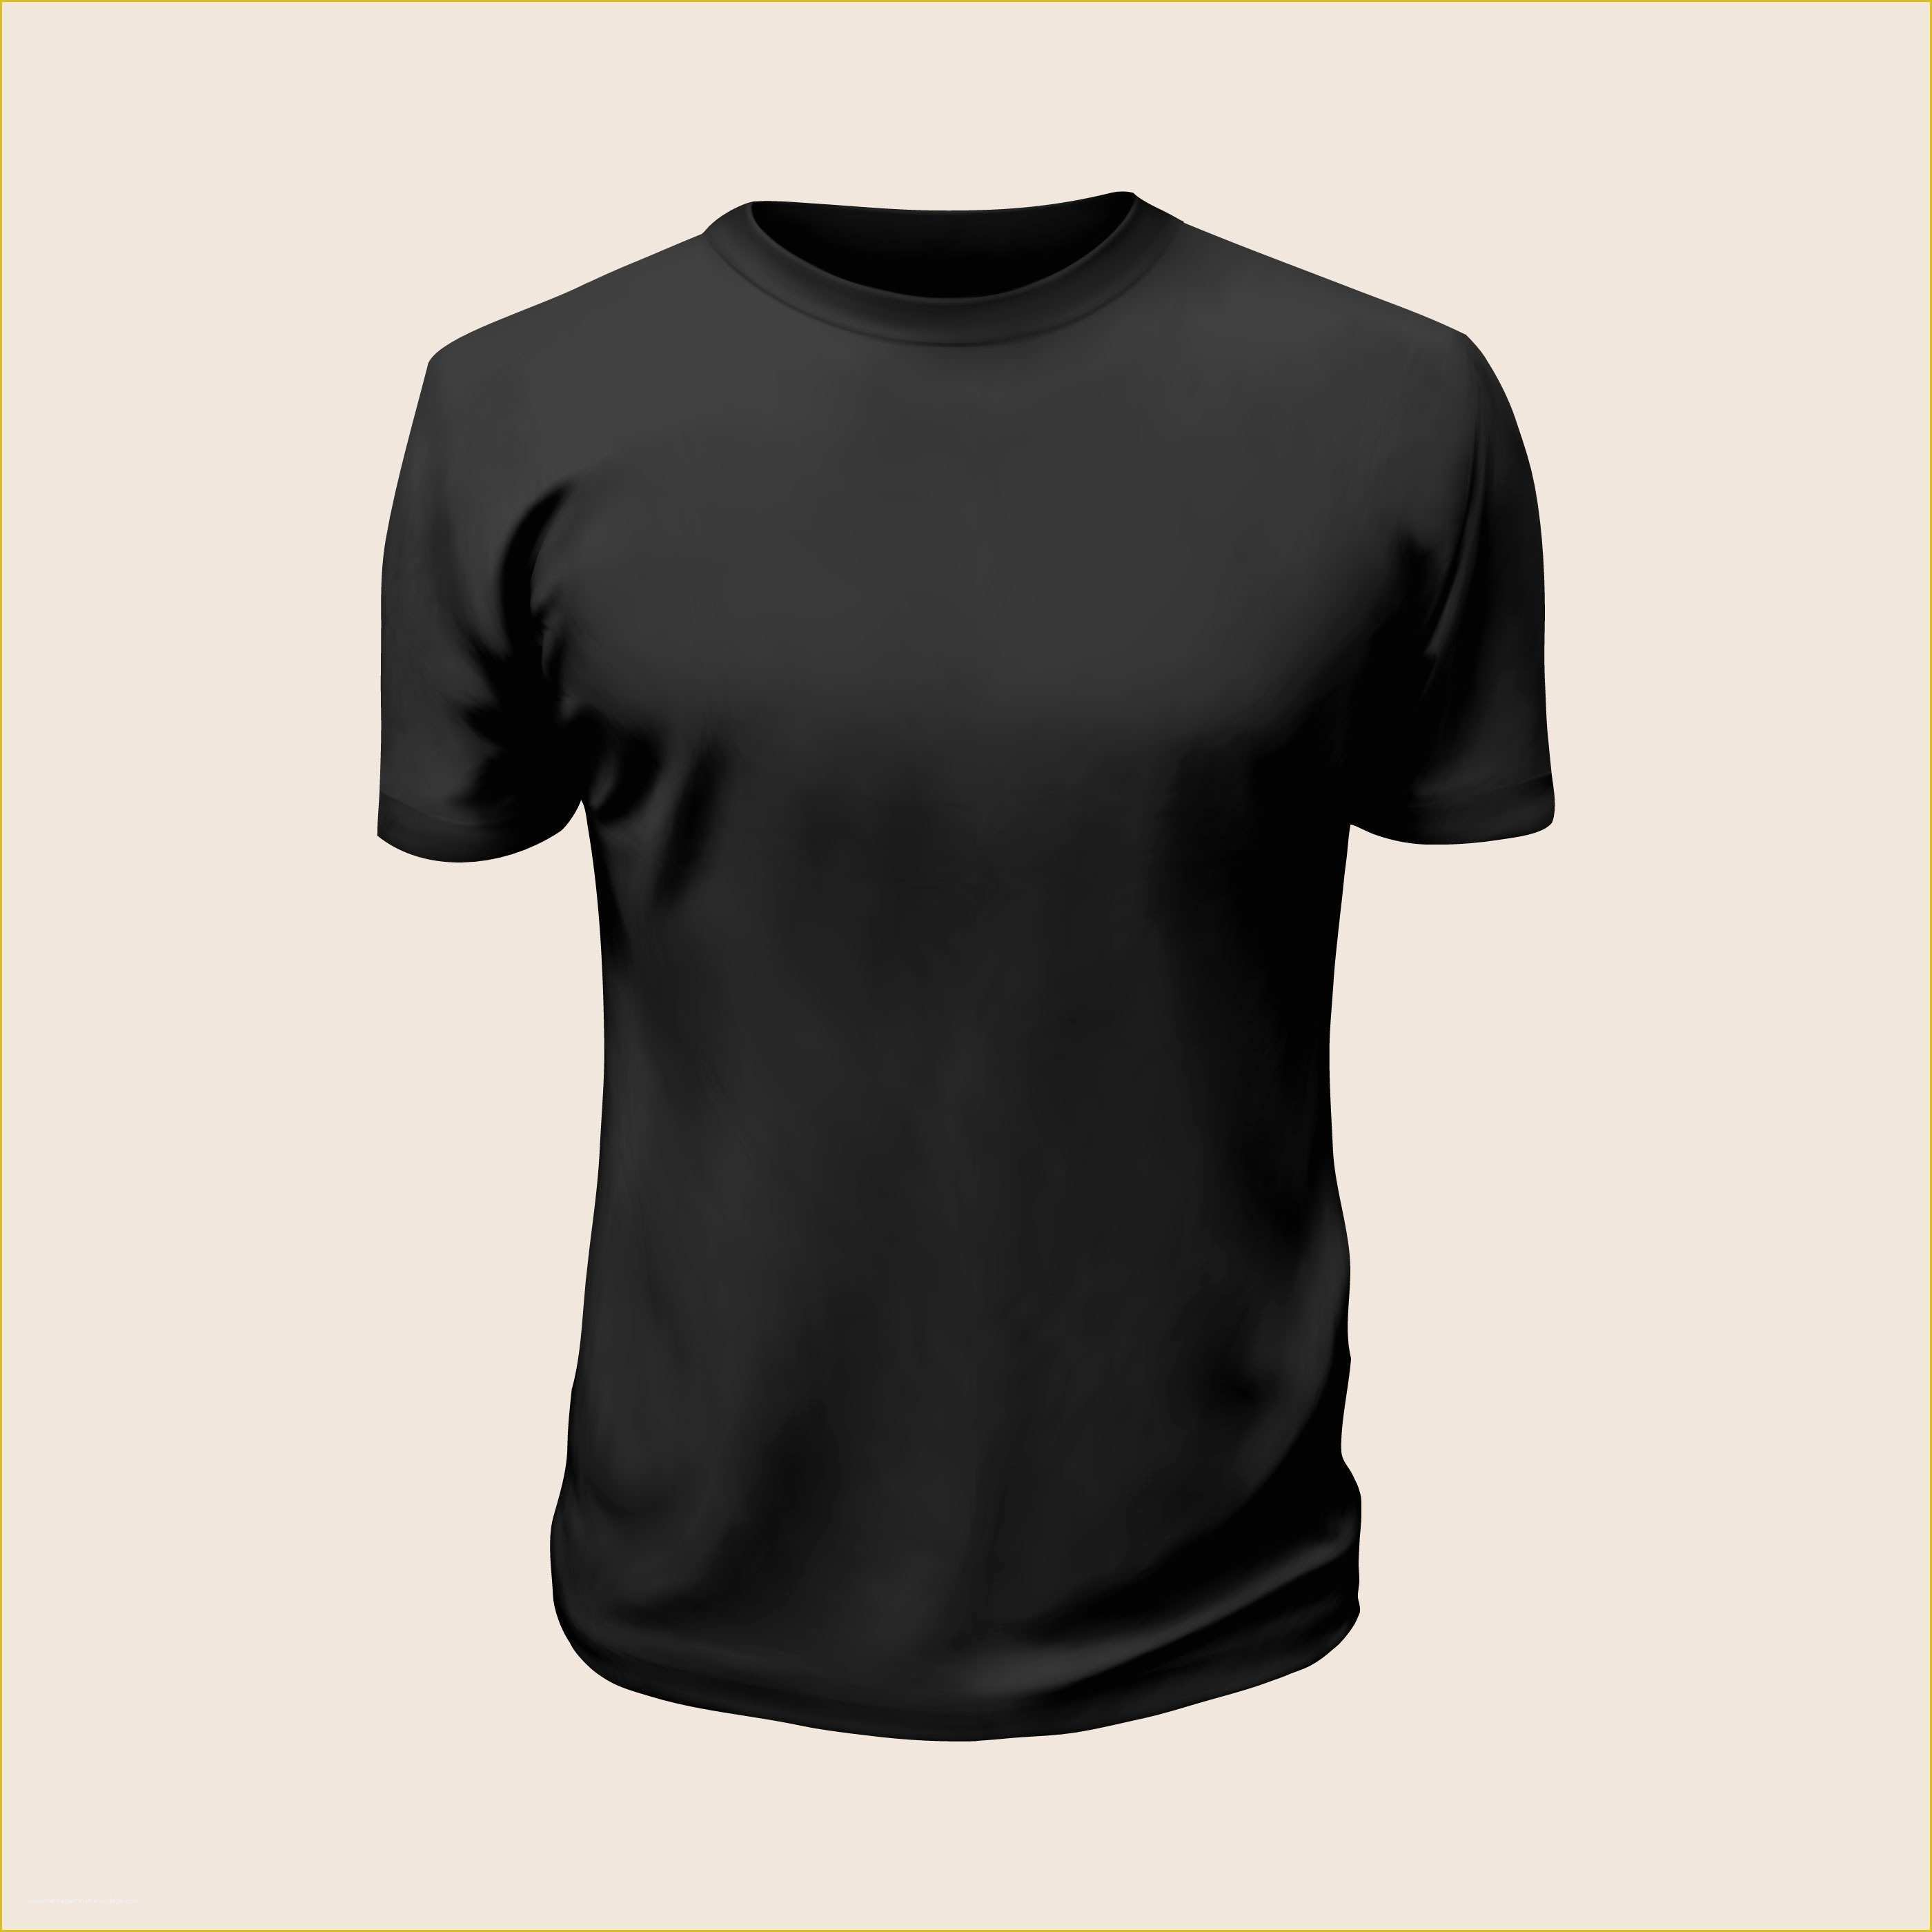 T Shirt Template Vector Free Download Of Tshirt Vector Black Shirt Download Free Vector Art